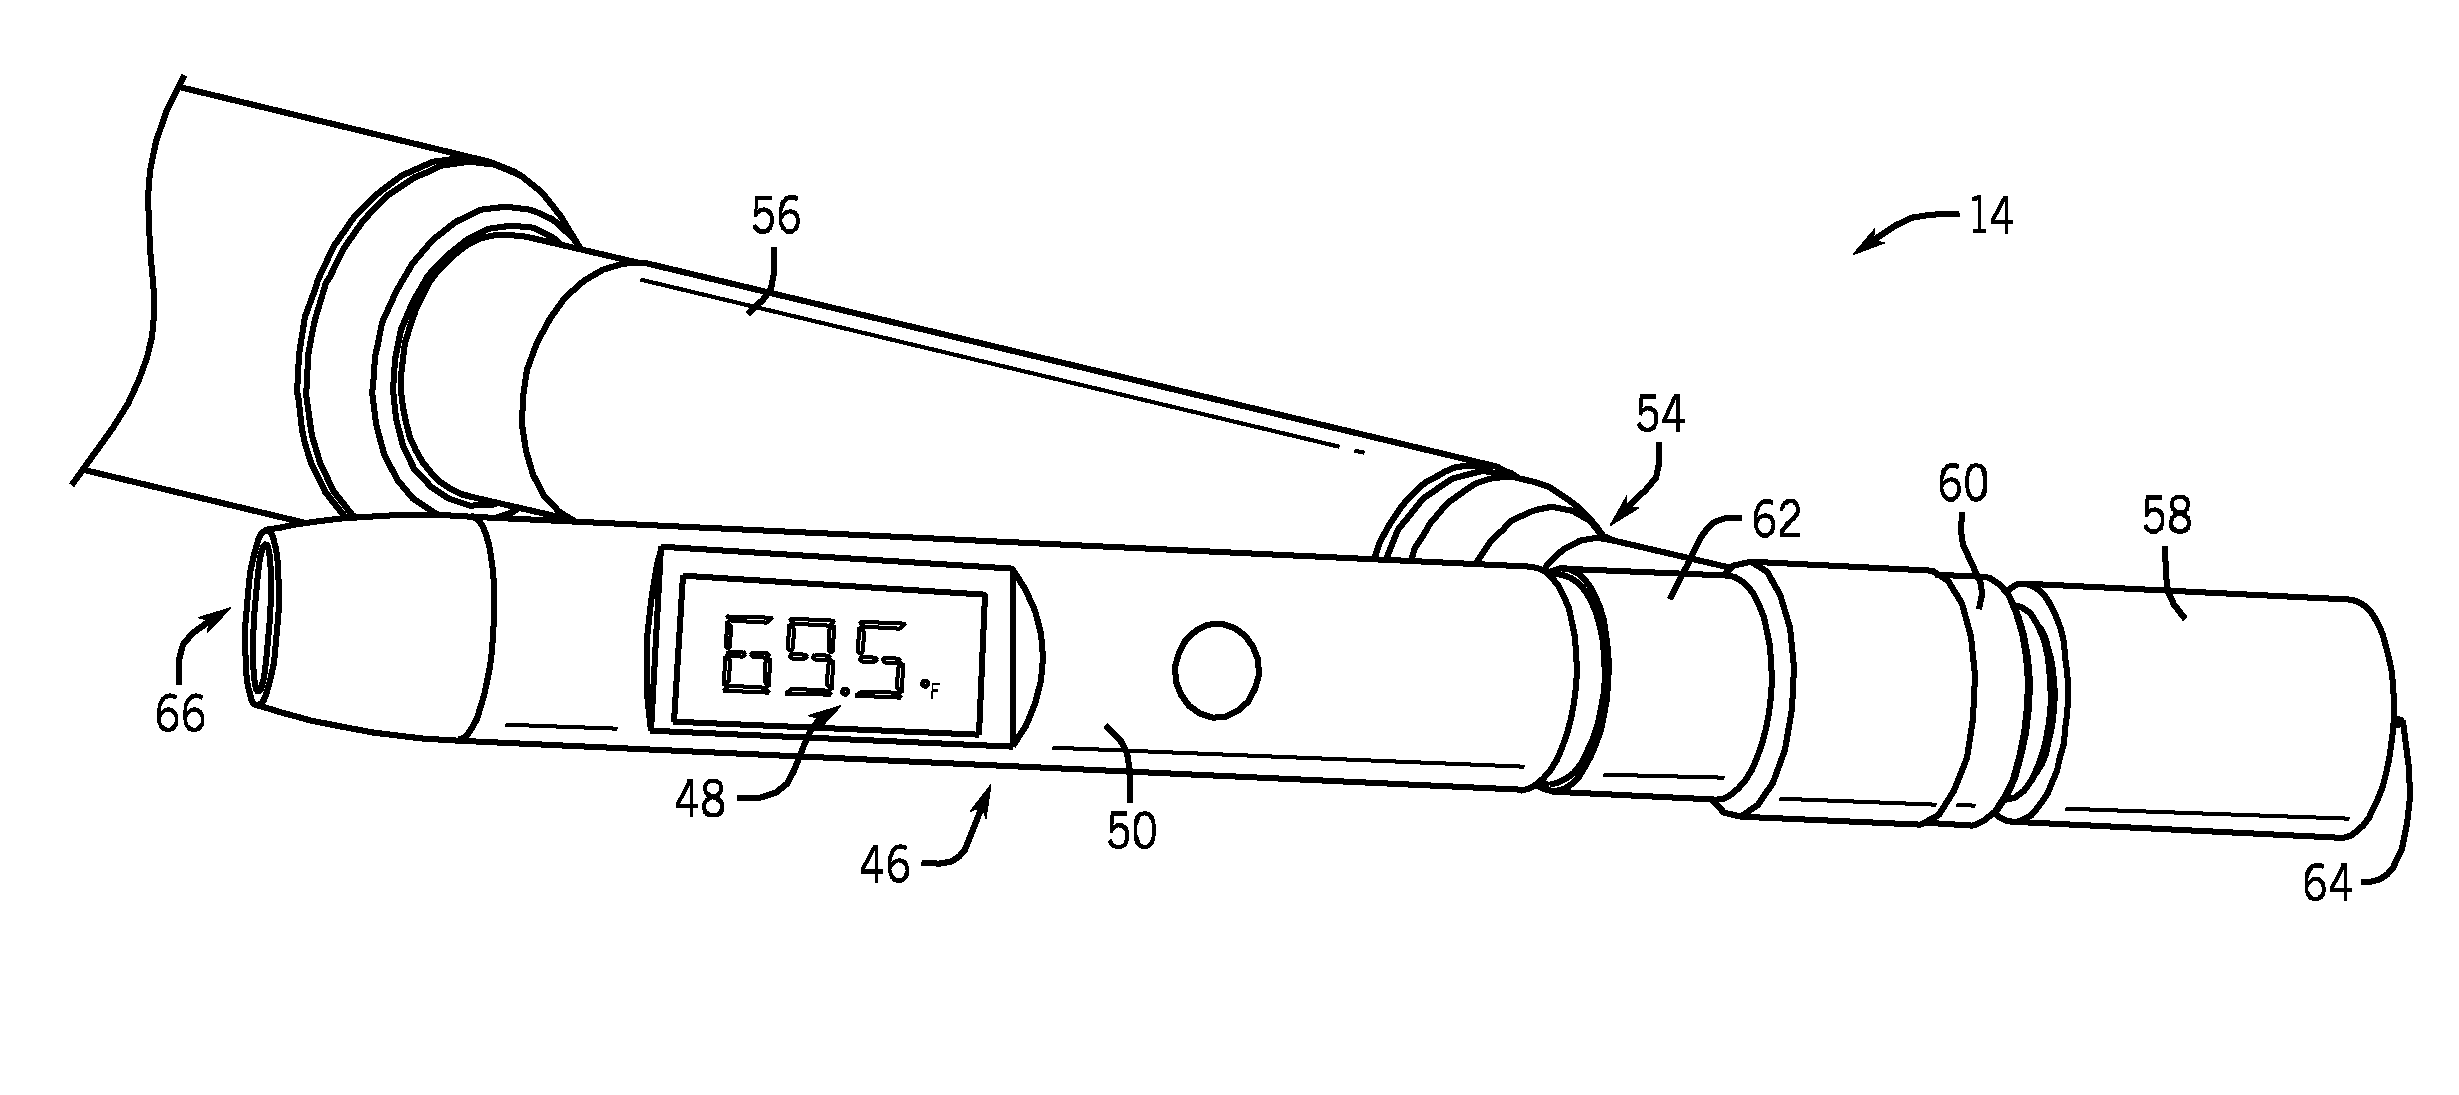 Welding torch with a temperature measurement device